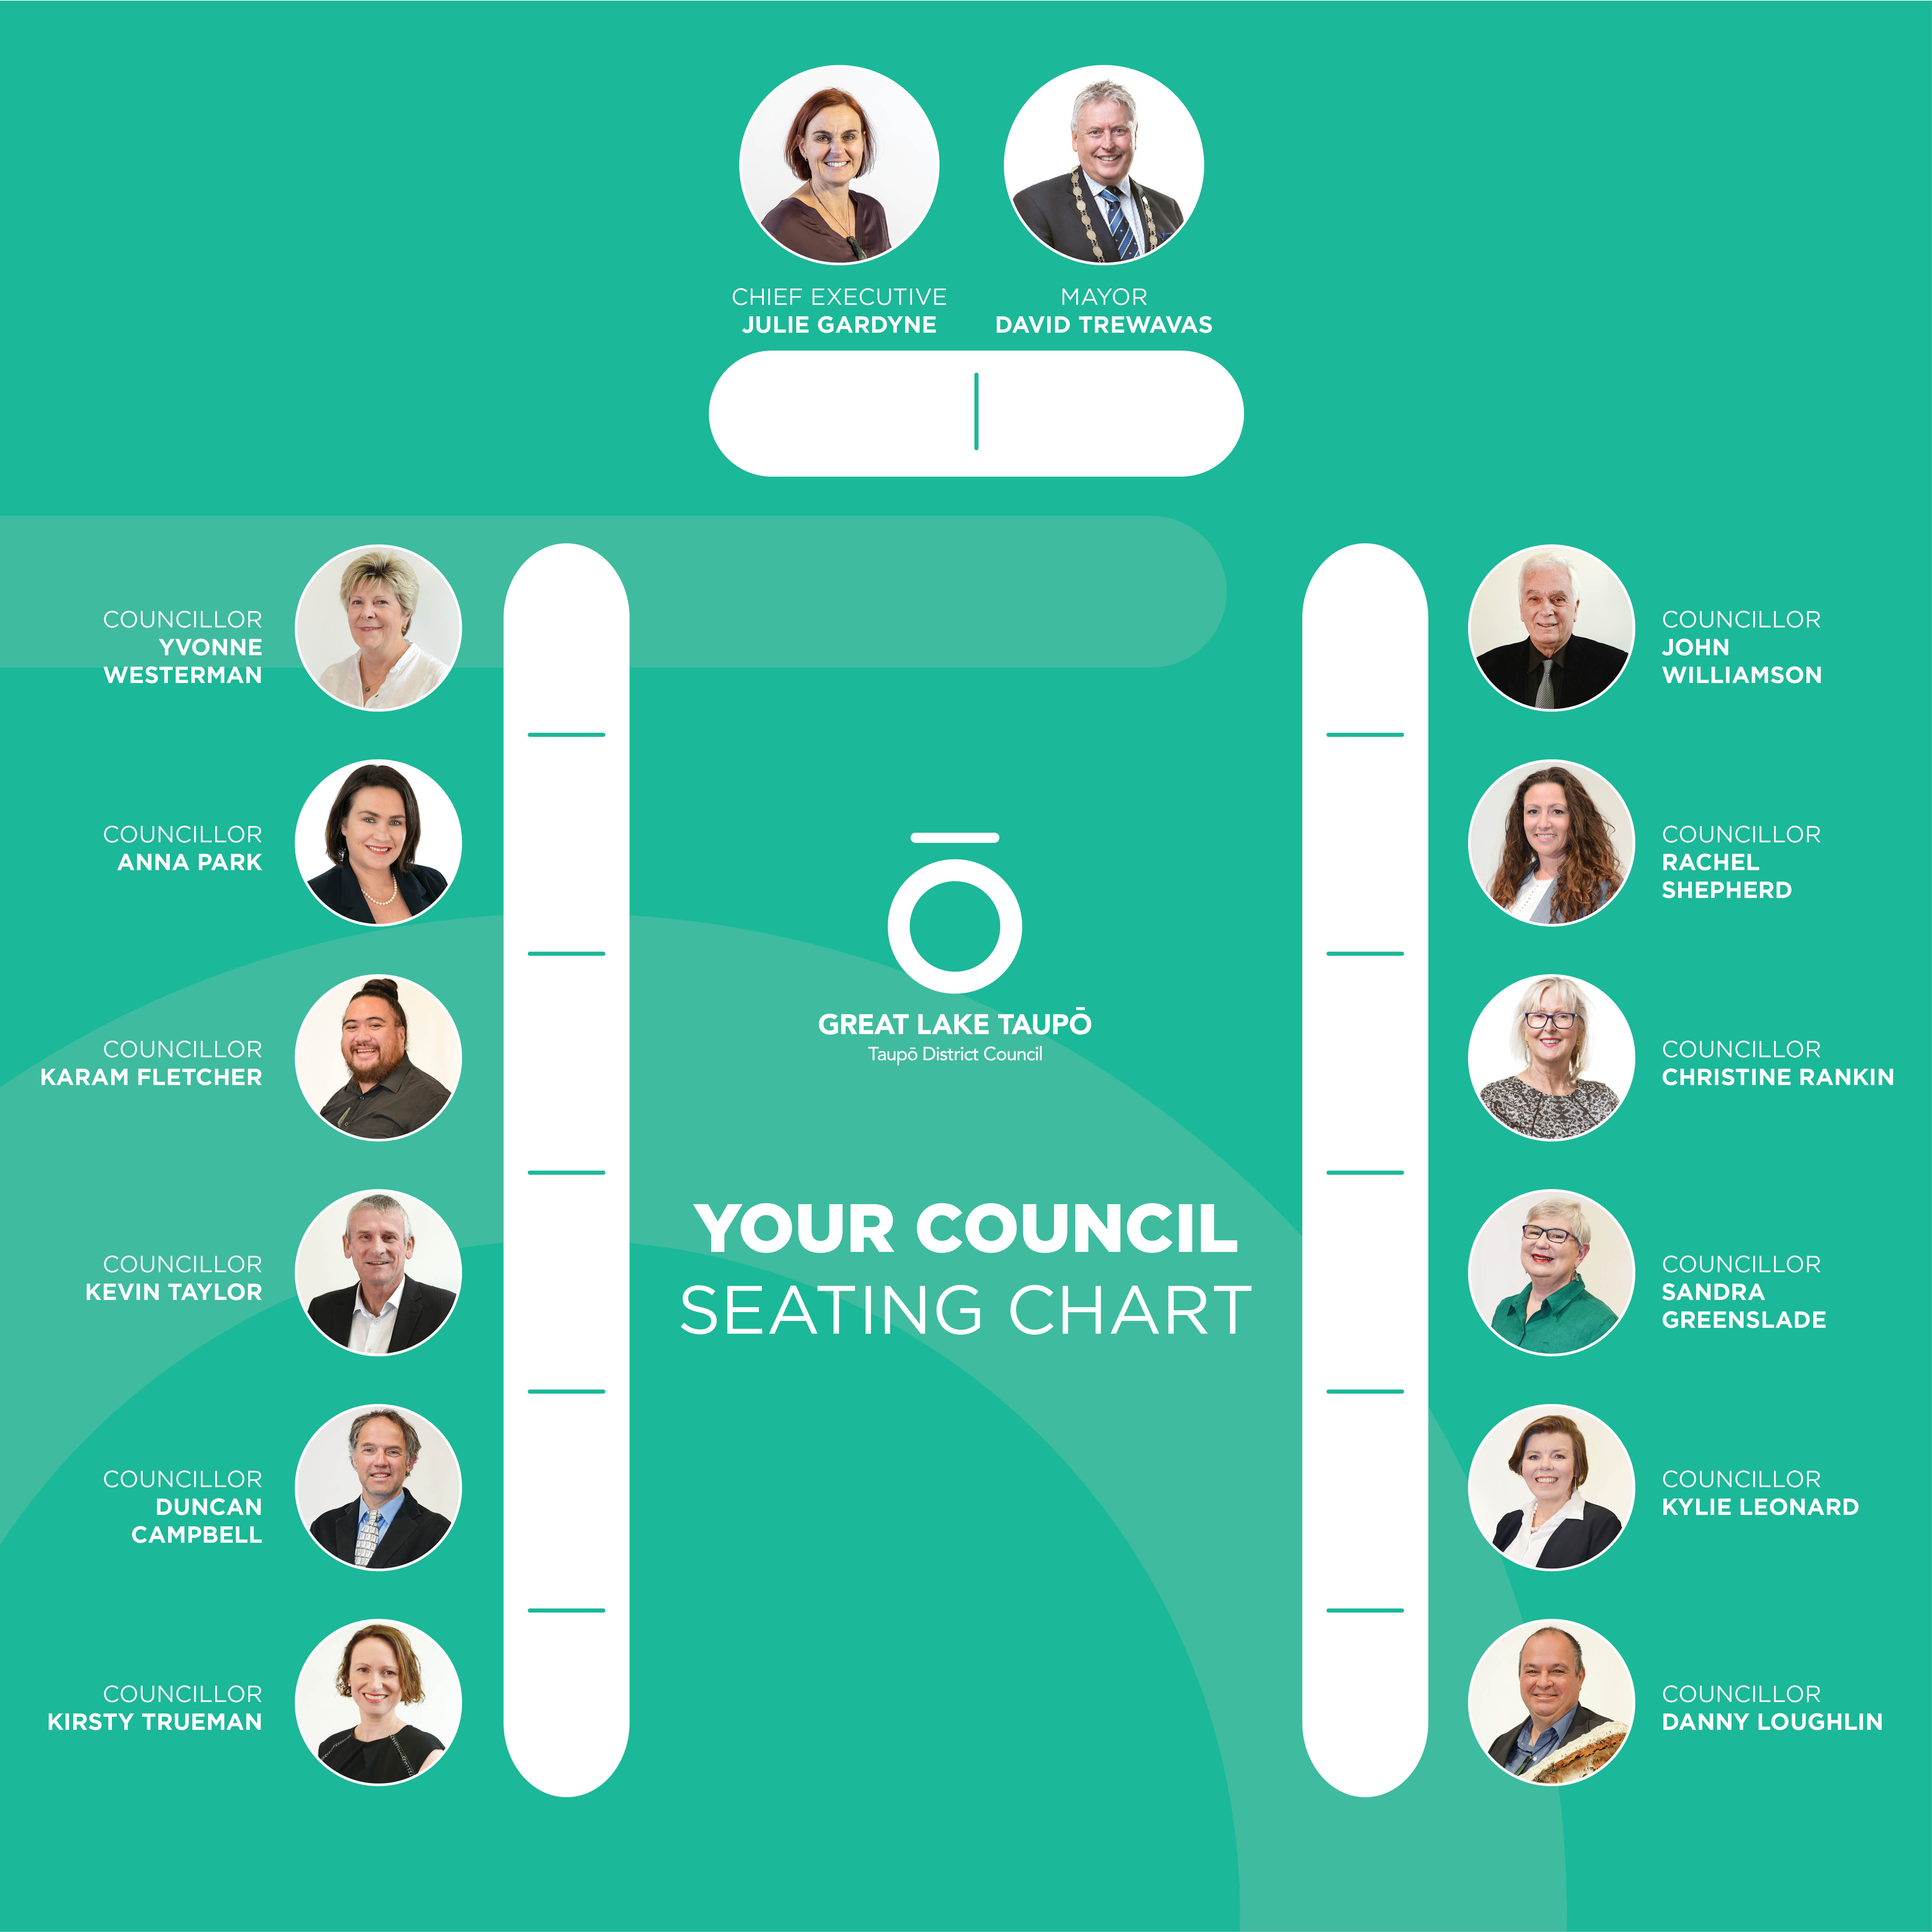 Council Chambers seating plan.  